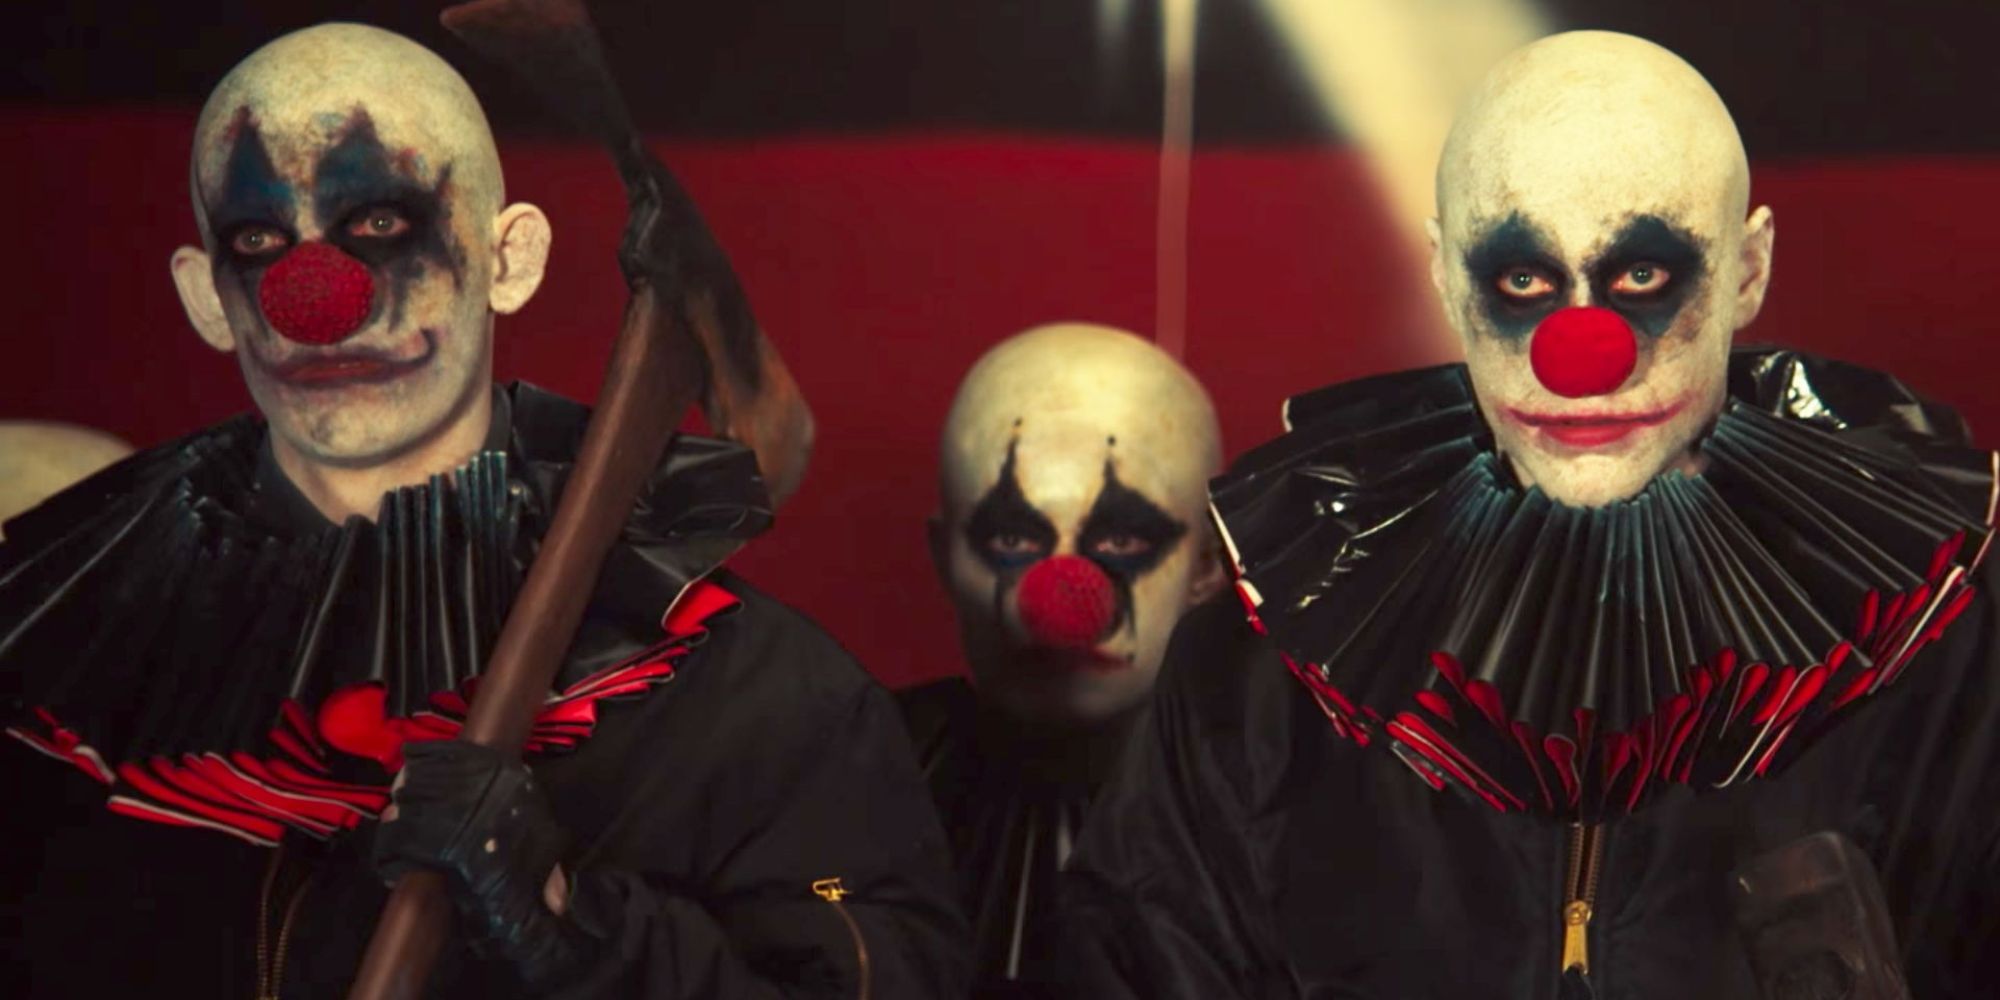 Clowns dressed in black and red in 'American Horror Story: Cult'